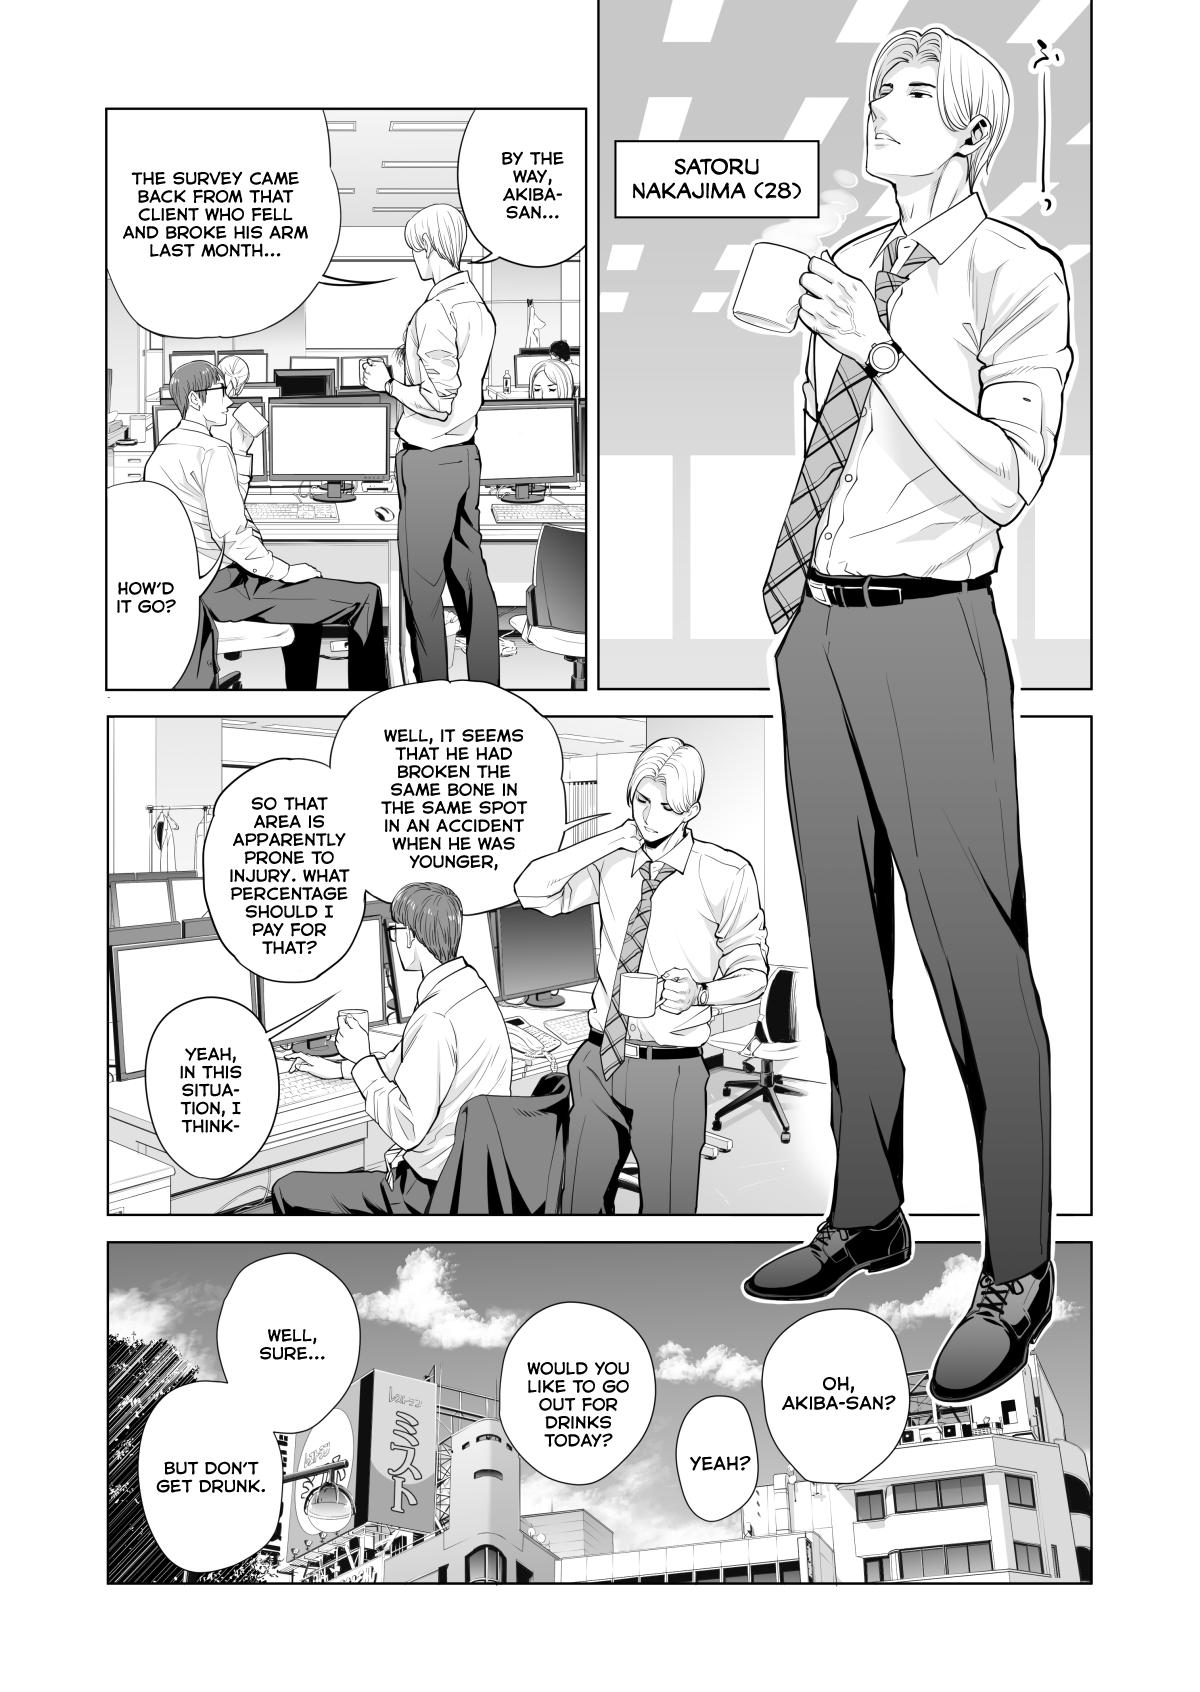 [HGT Lab (Tsusauto)] Tsukiyo no Midare Zake (Zenpen) Moonlit Intoxication ~ A Housewife Stolen by a Coworker Besides her Blackout Drunk Husband ~ Chapter 1 [English] 9